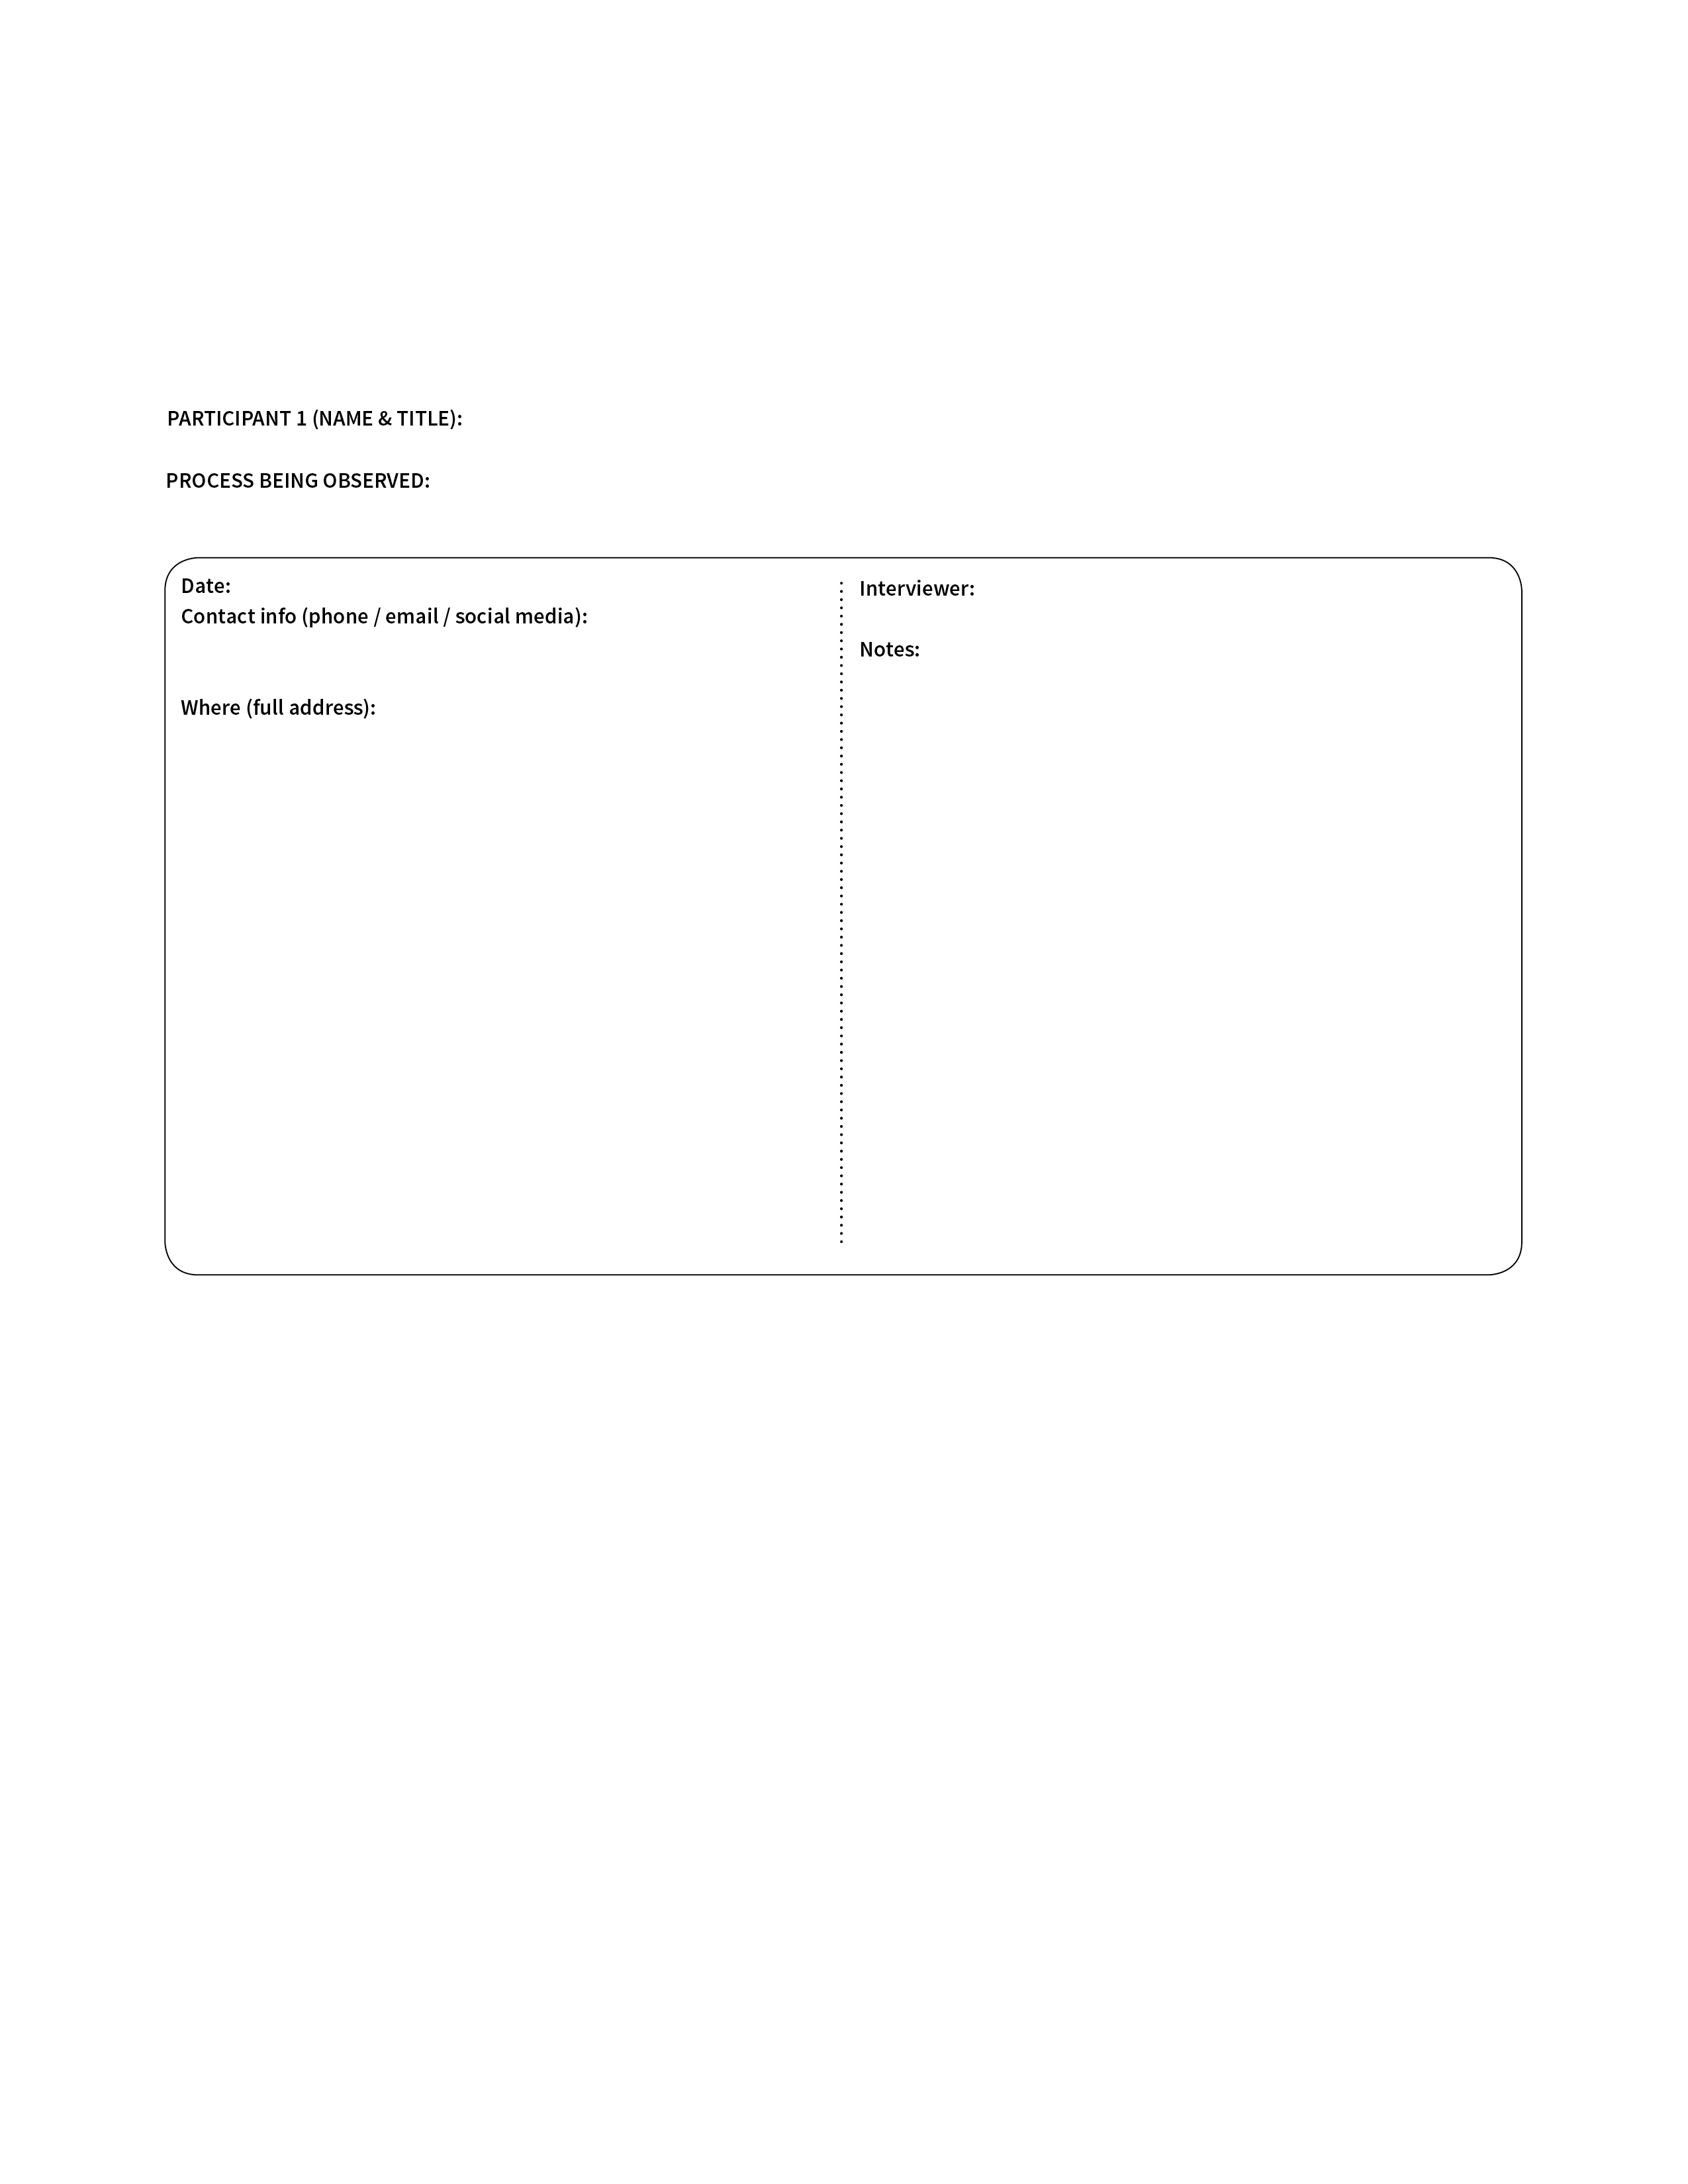 Framework for recording observation notes. Framework includes spaces for: participant name and title, process being observted, date, contact information, where the oberservation took place, the interviewer name, and notes.